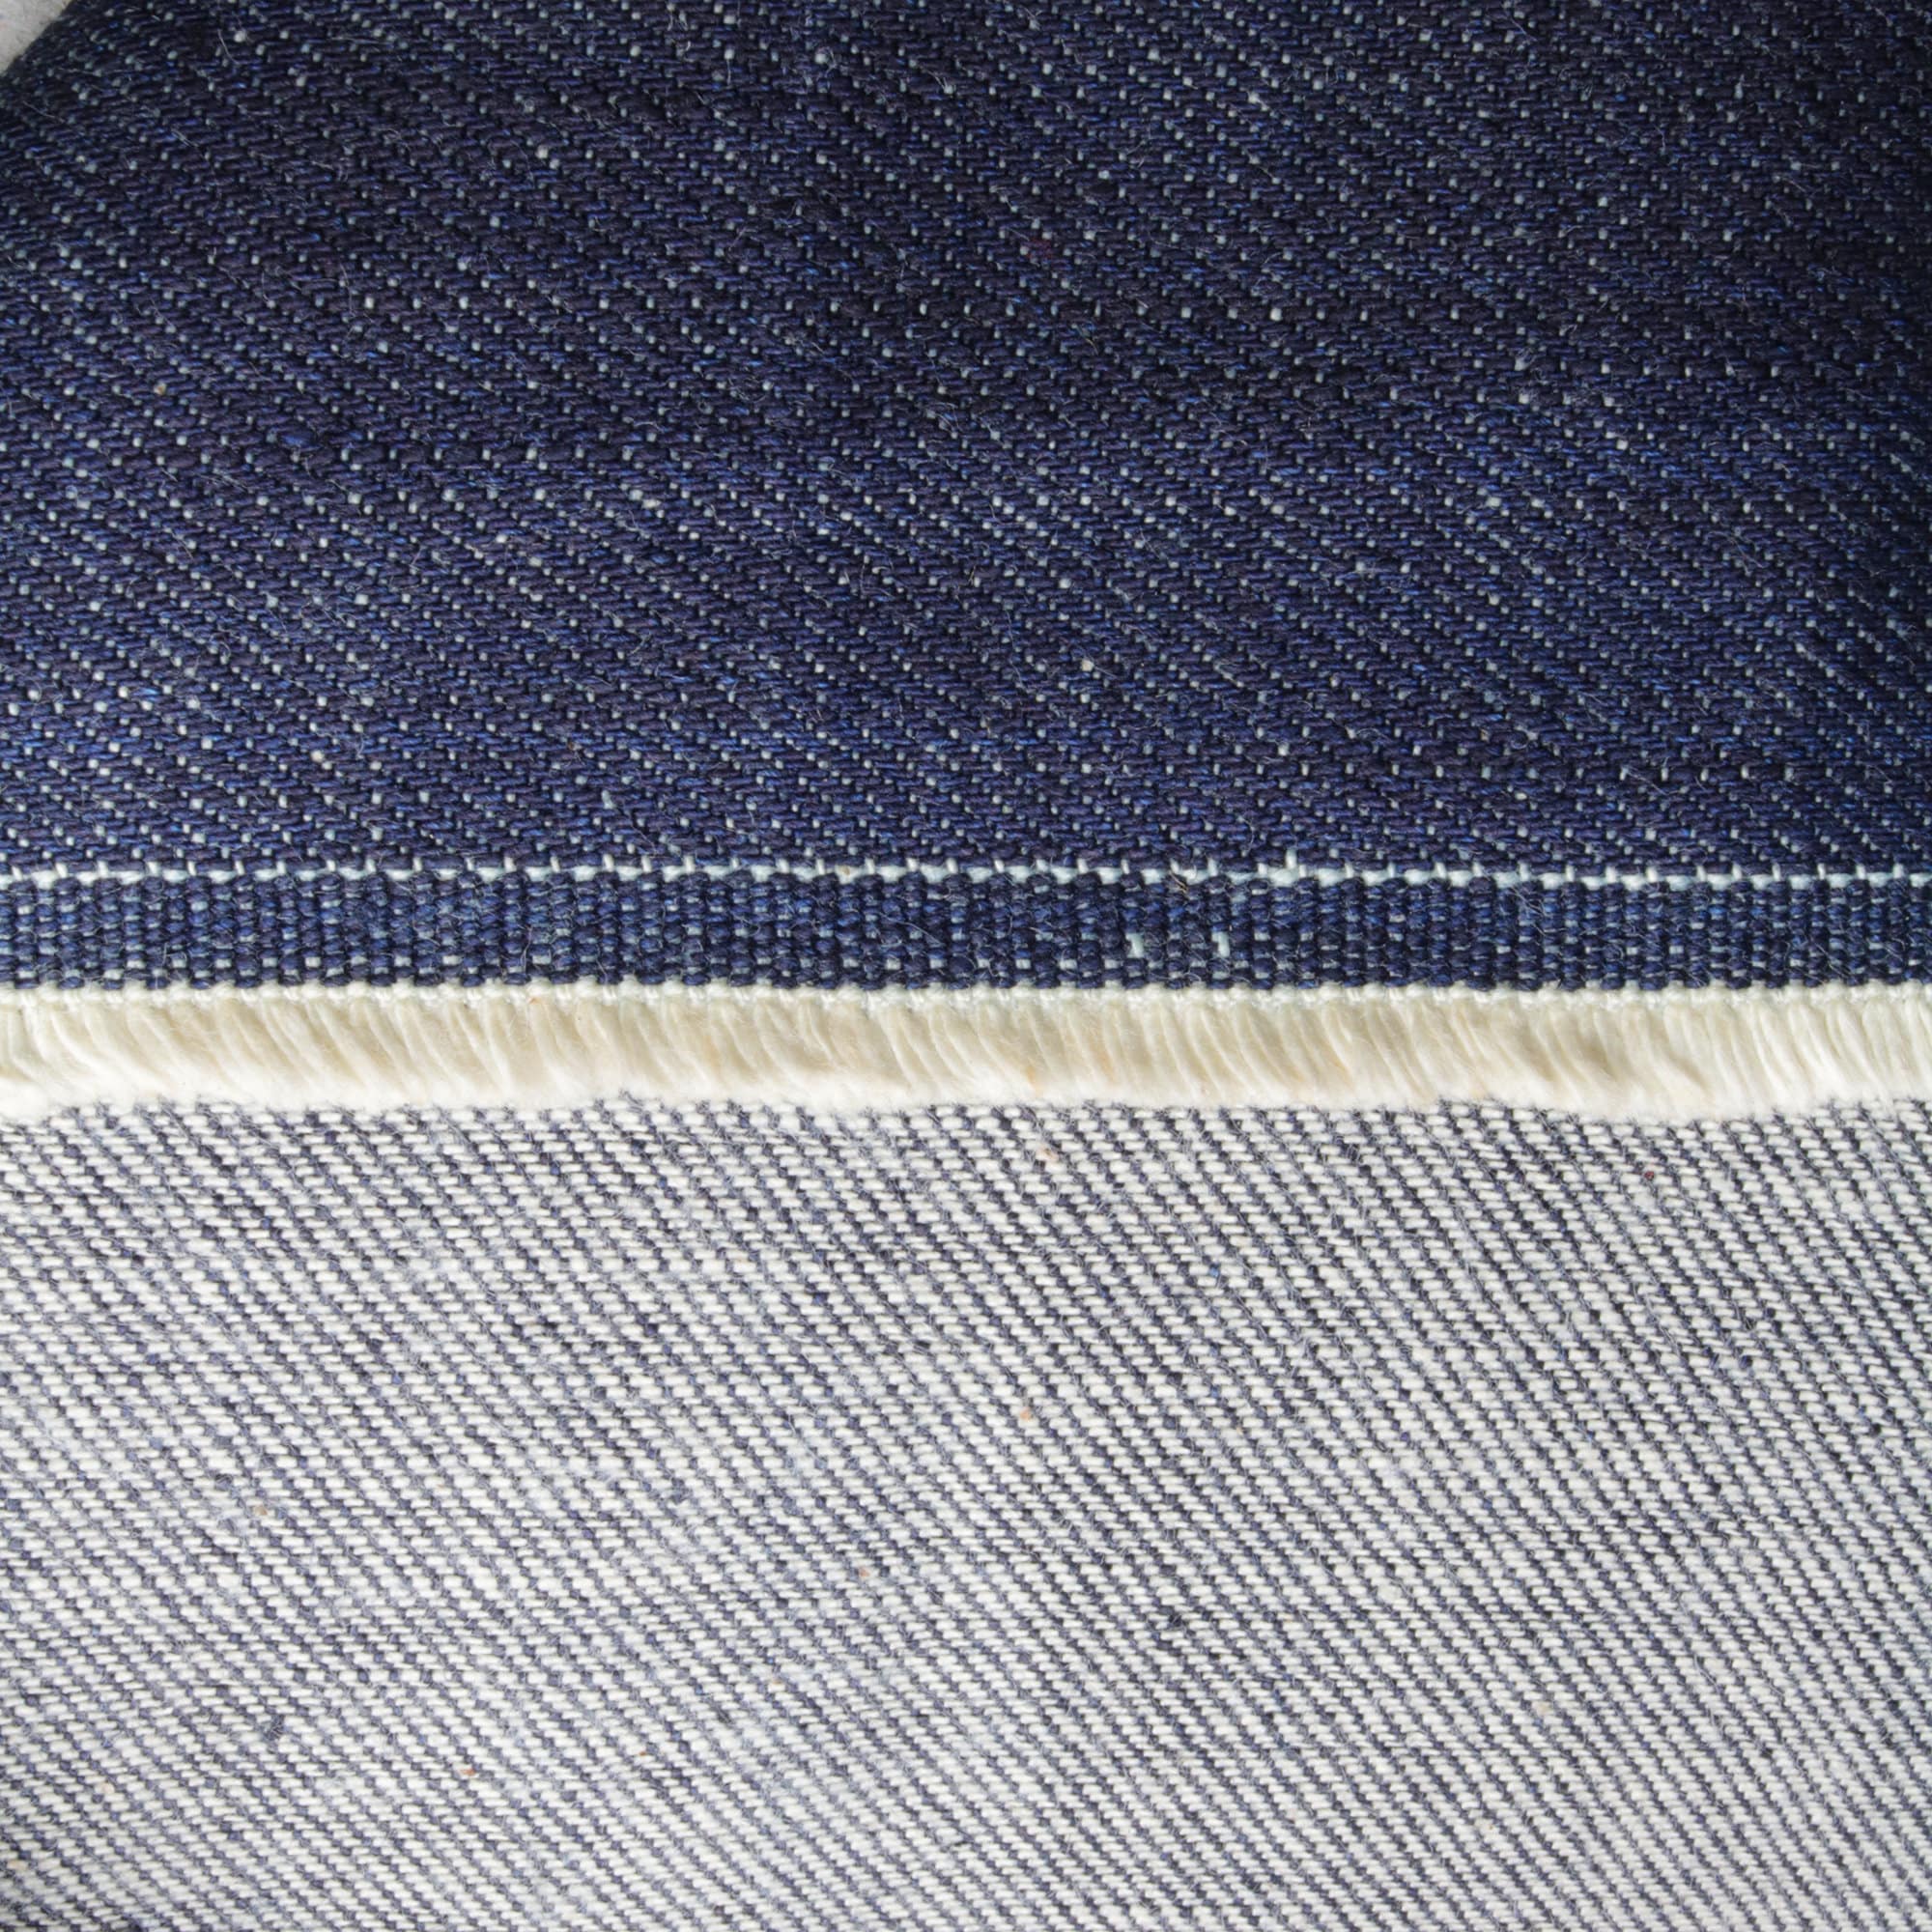 E679 Light Blue Washed Preshrunk Upholstery Grade Denim Fabric By The Yard